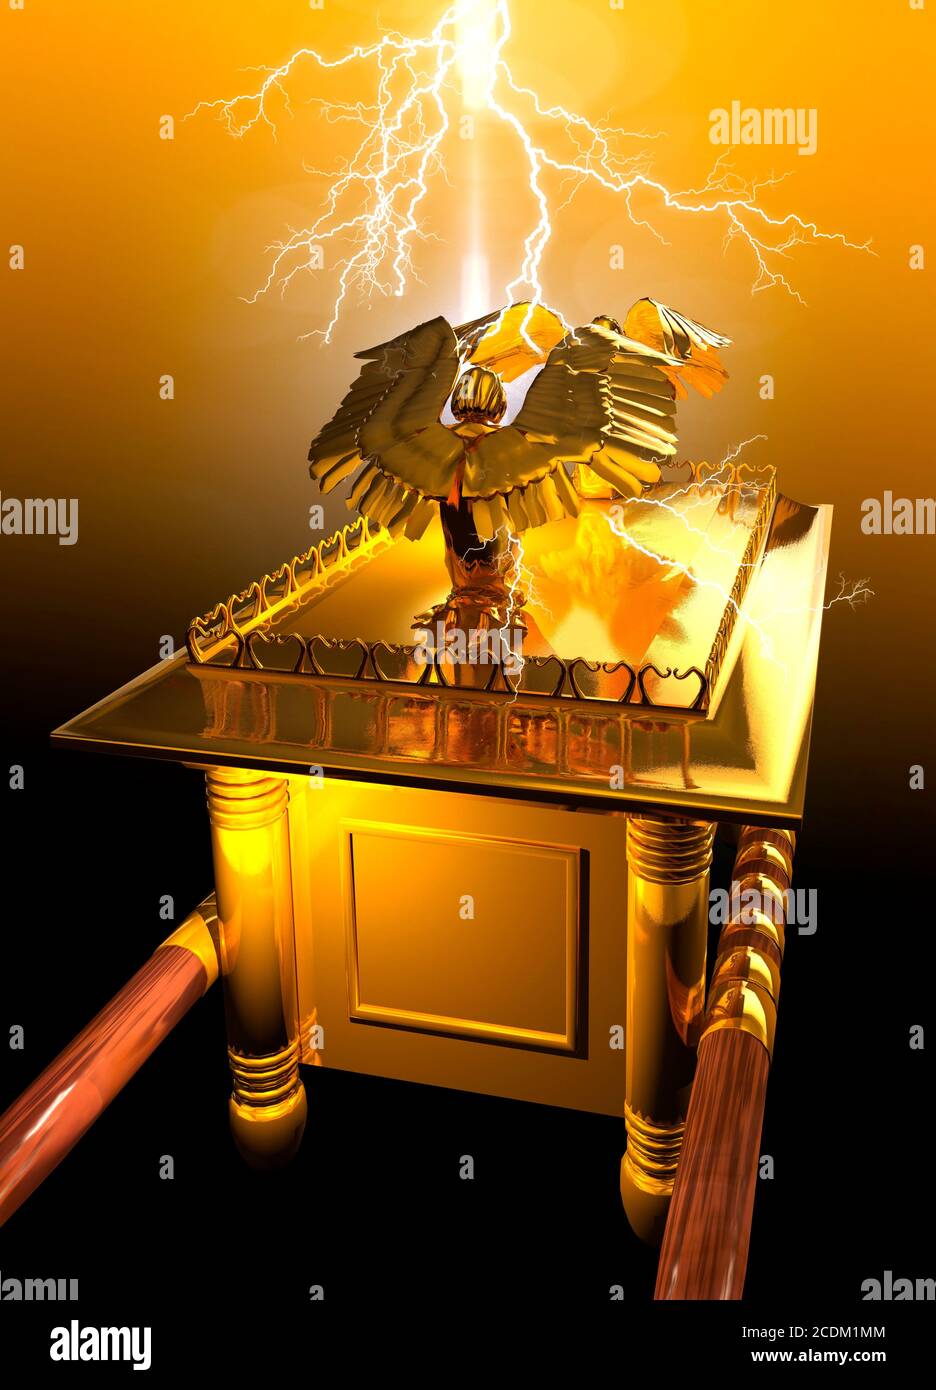 Ark of the Covenant, conceptual illustration. Stock Photo